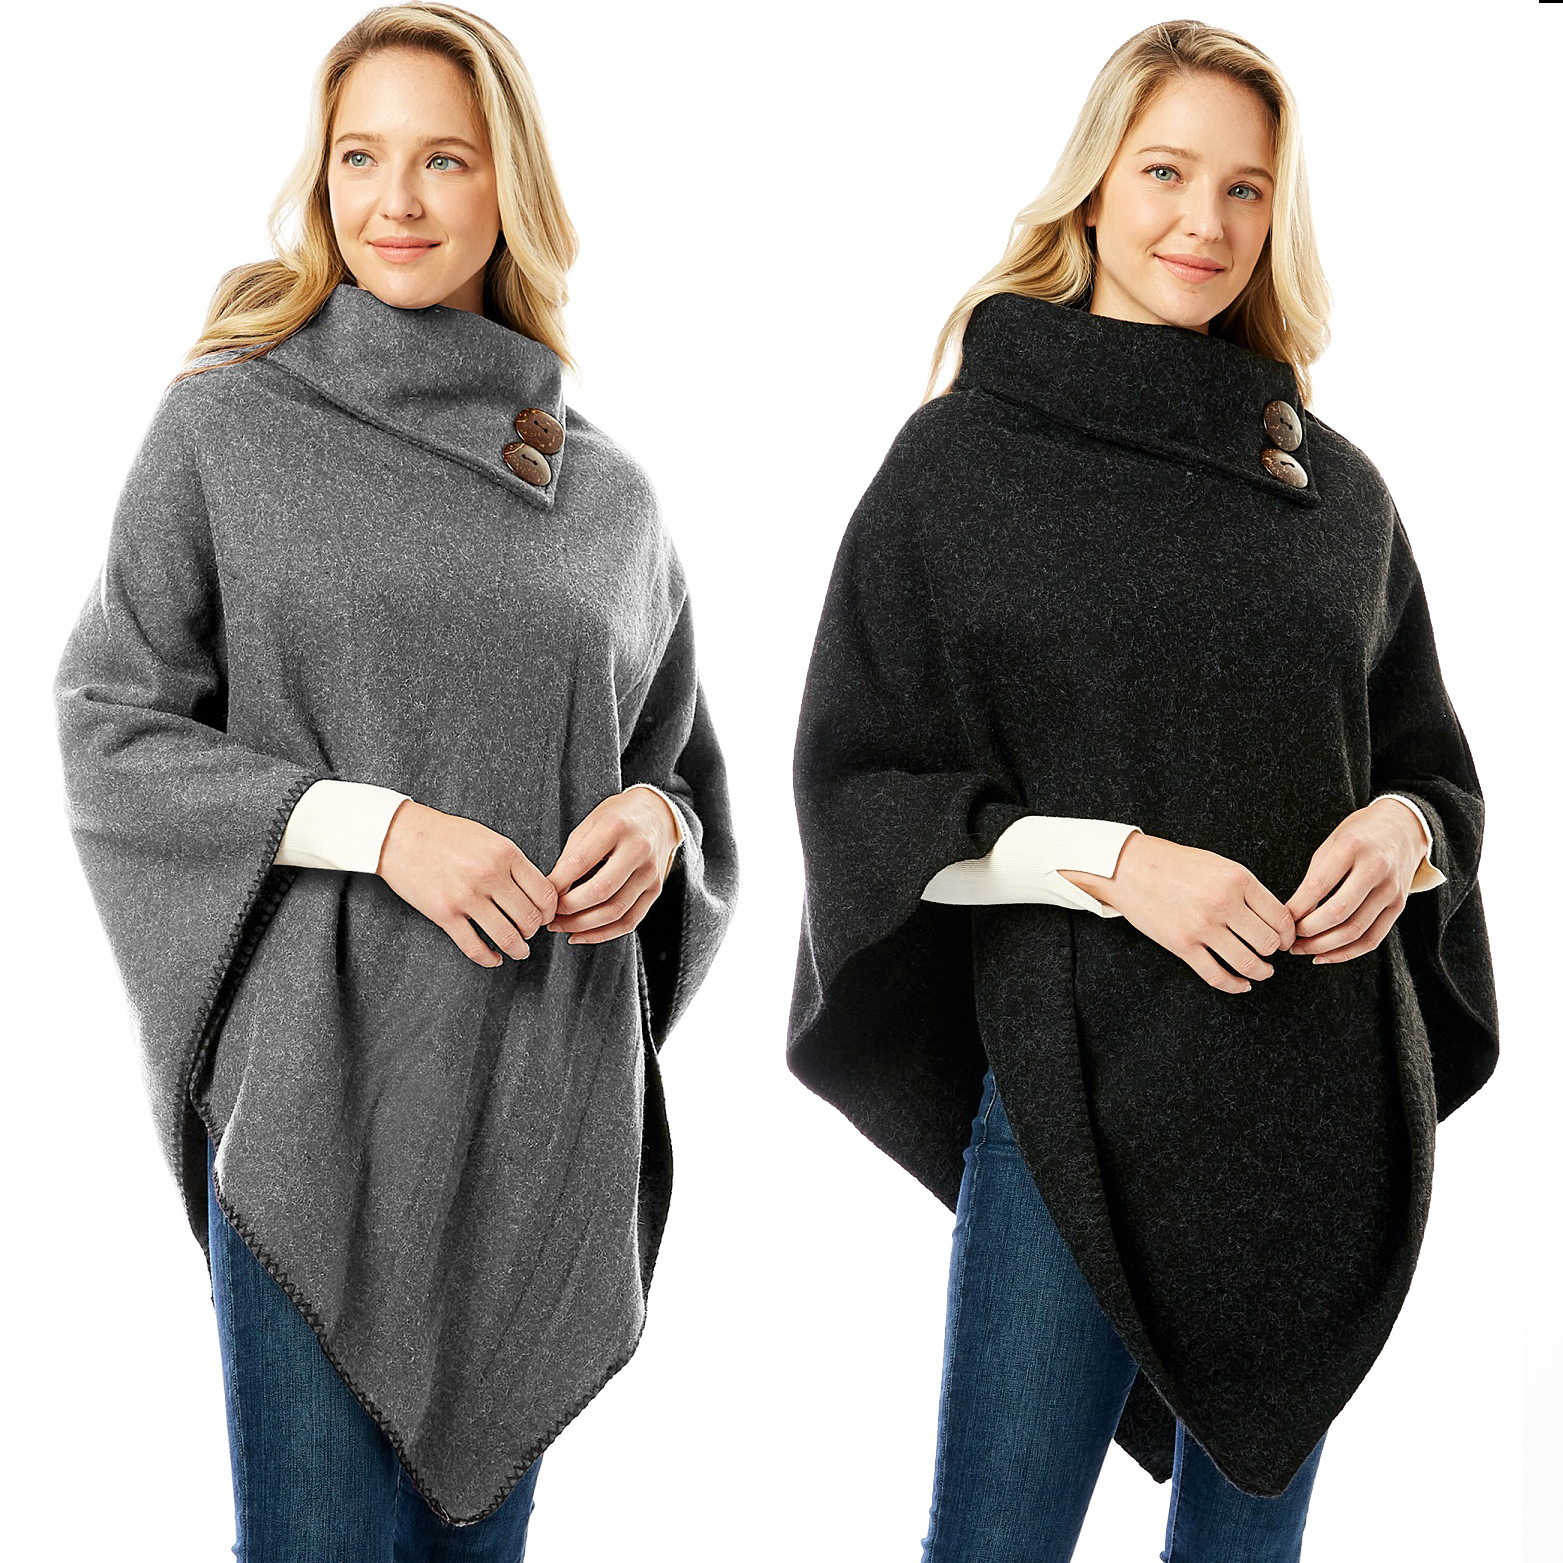 1295 - Wool Feel Poncho w/ Button Accents